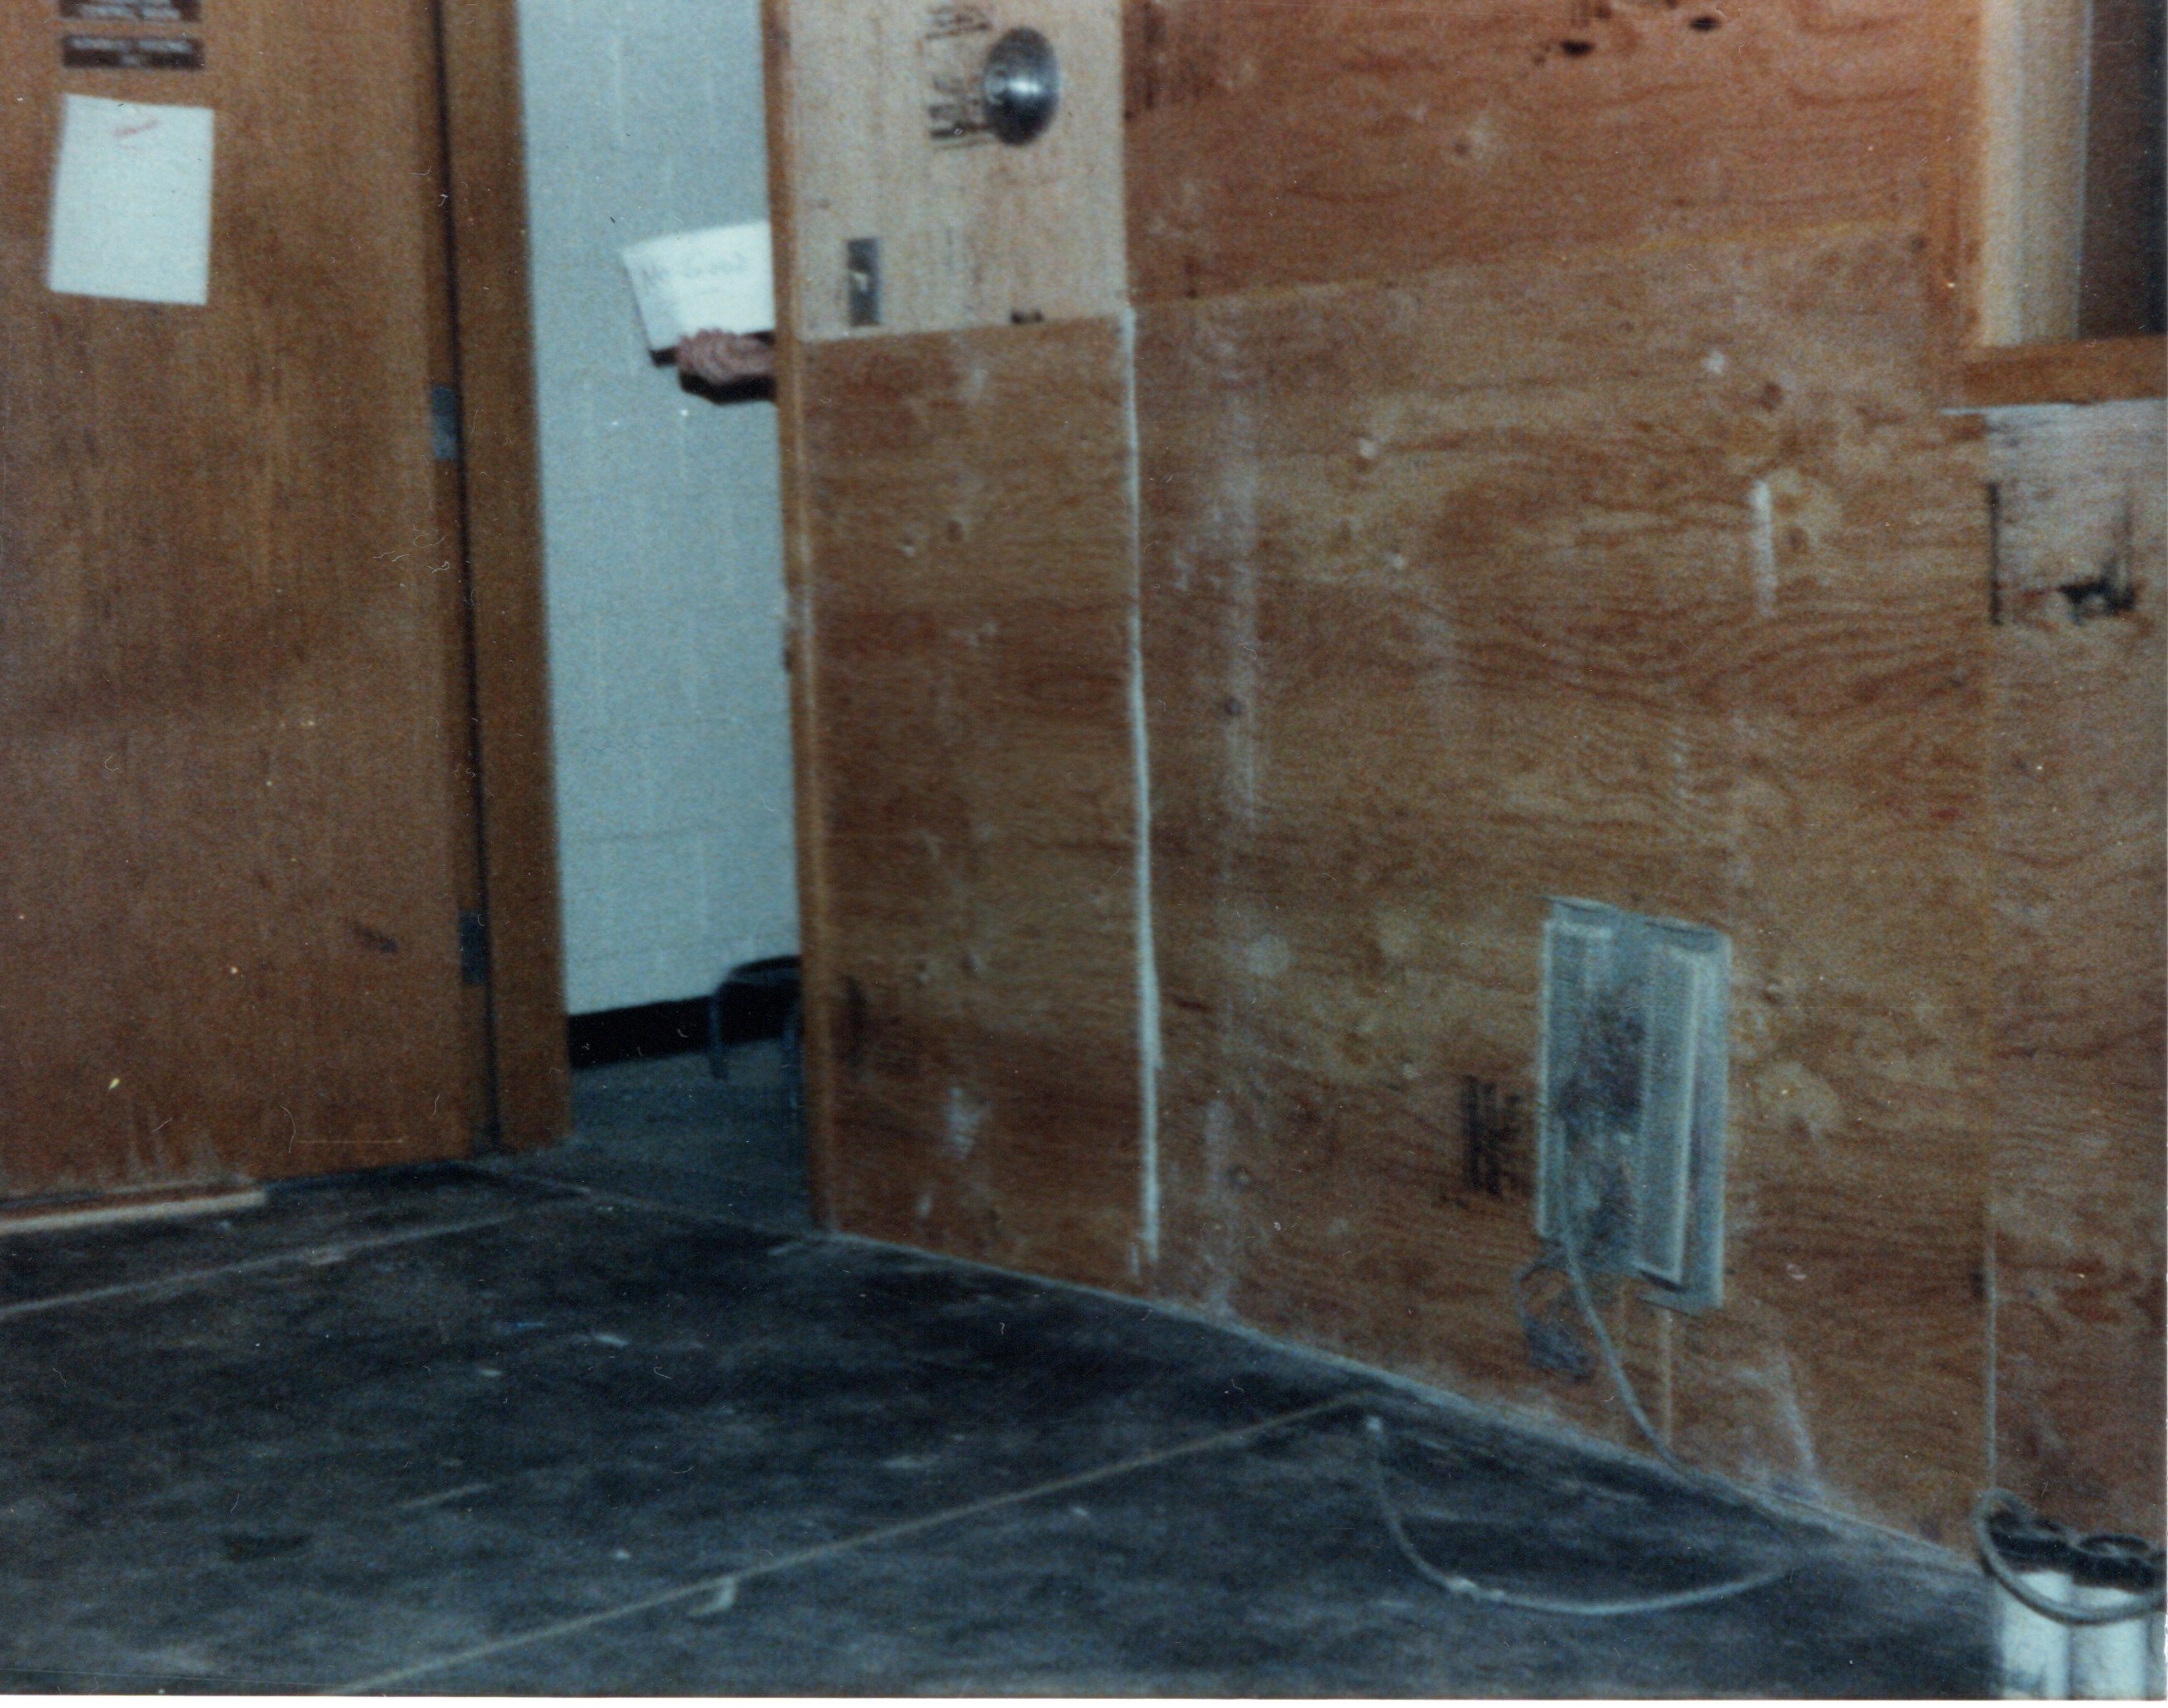 1985-Production Rebuild - Plywood on the wall to mount items